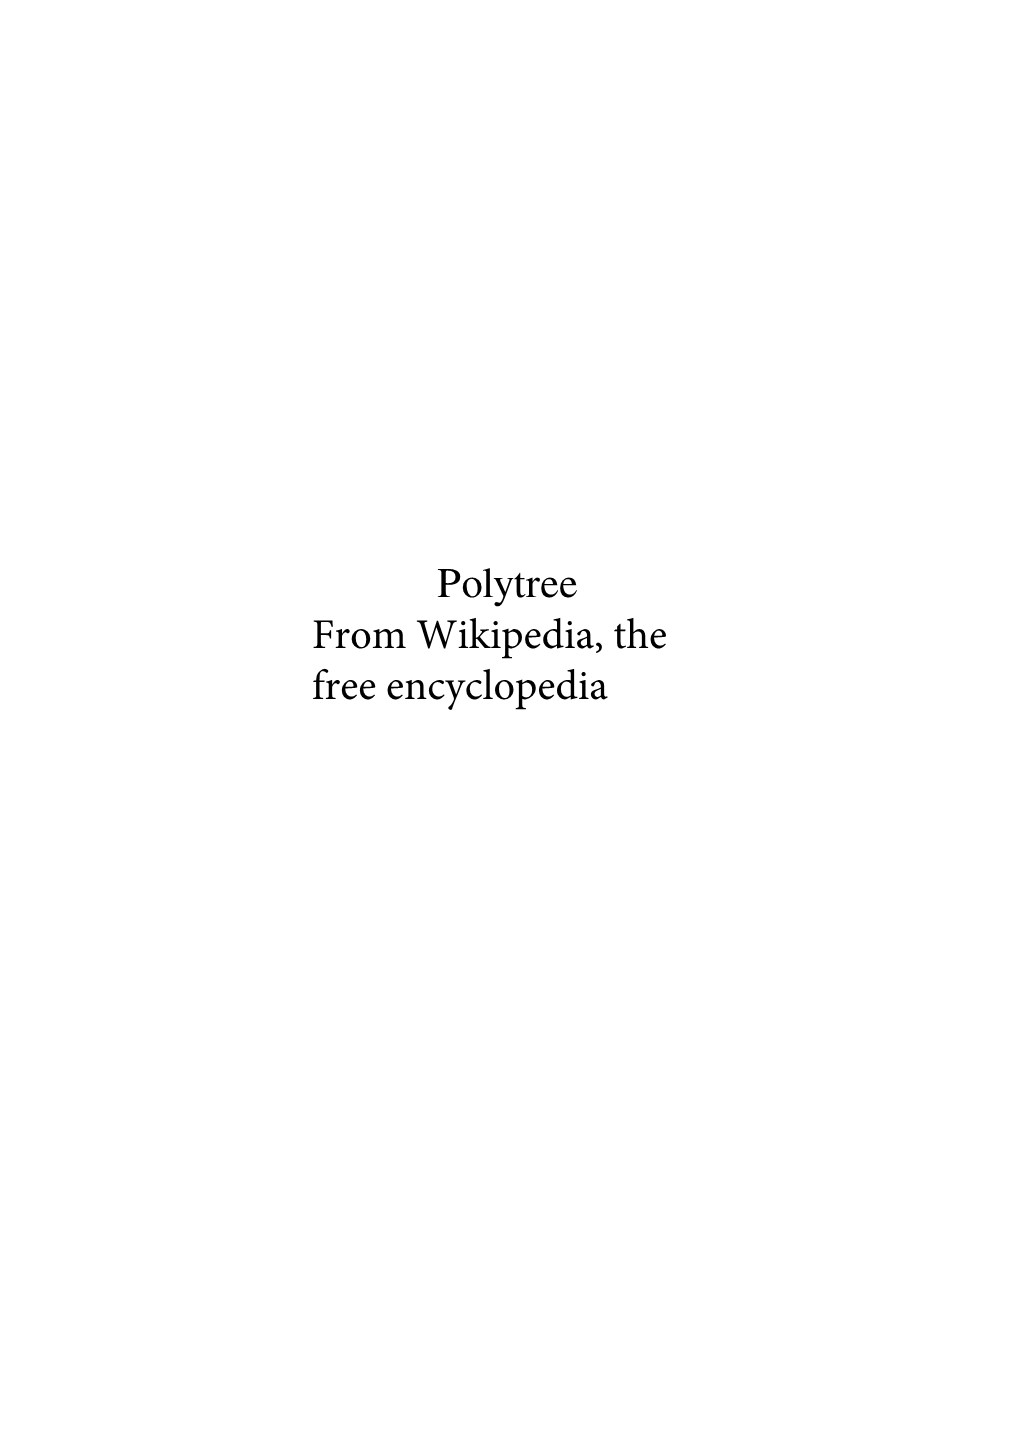 Polytree from Wikipedia, the Free Encyclopedia Contents